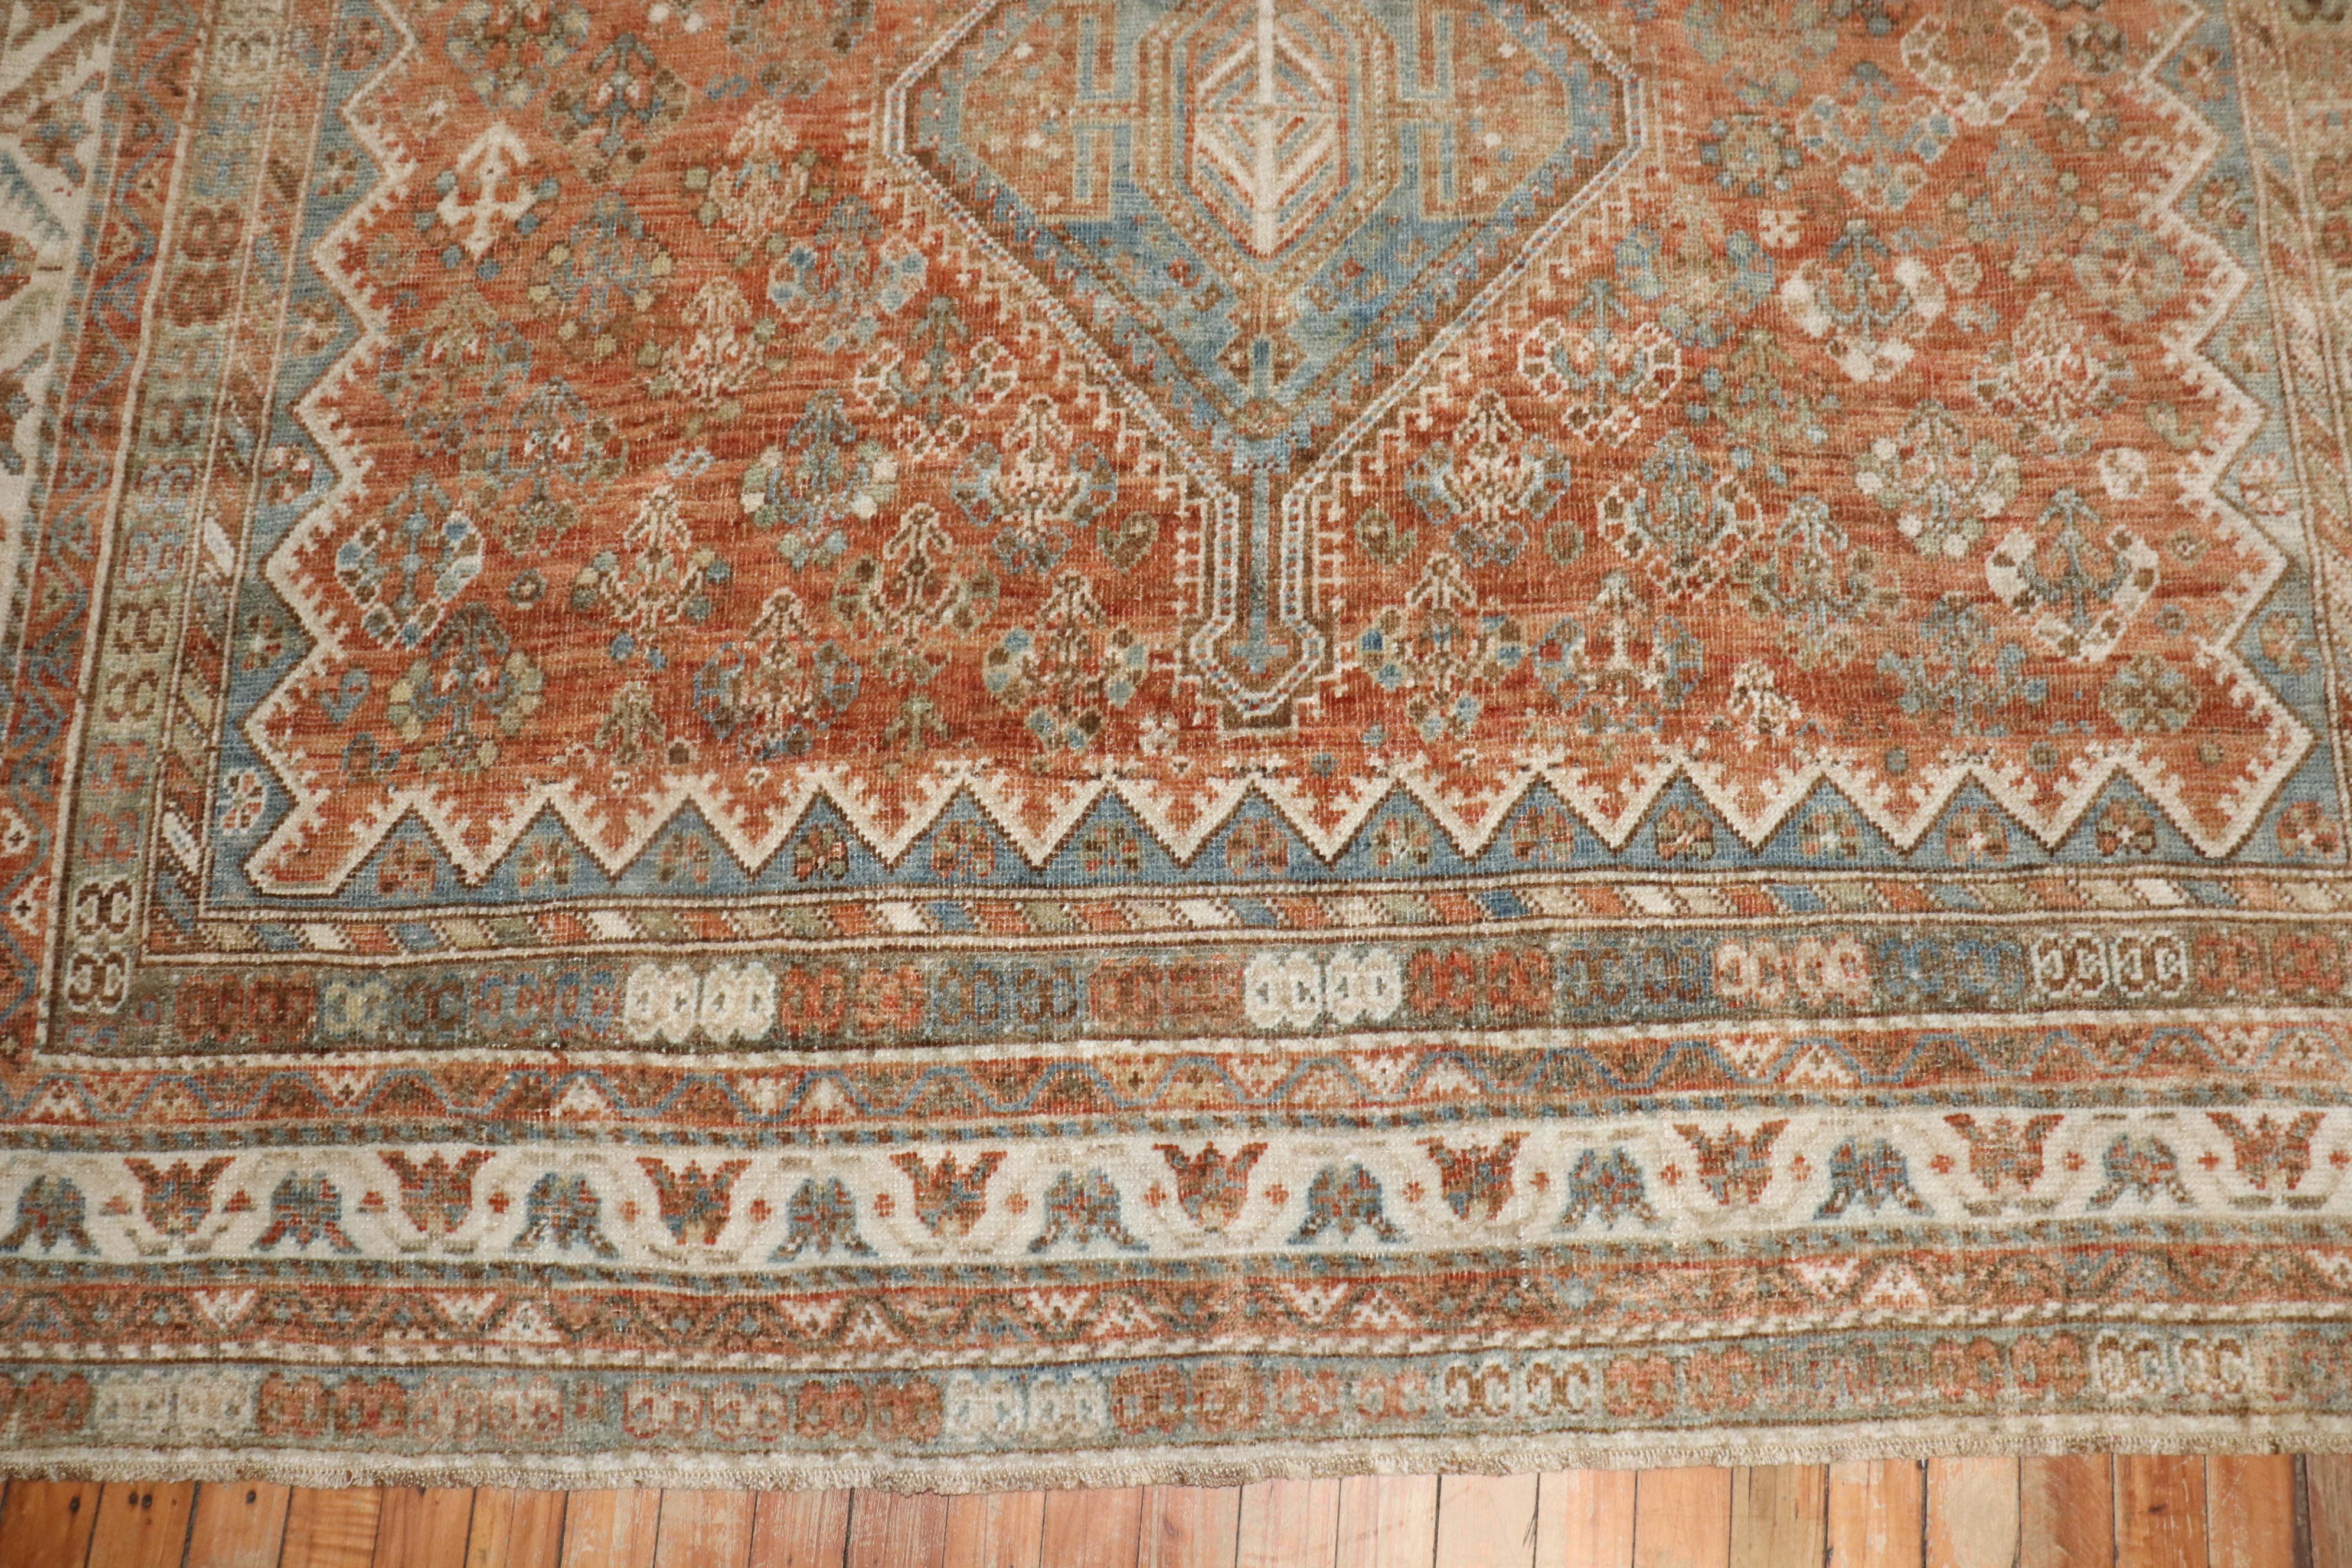 An early 20th century Persian Shiraz small room size tribal rug in earth tones

circa 1920

Measures: 7'5